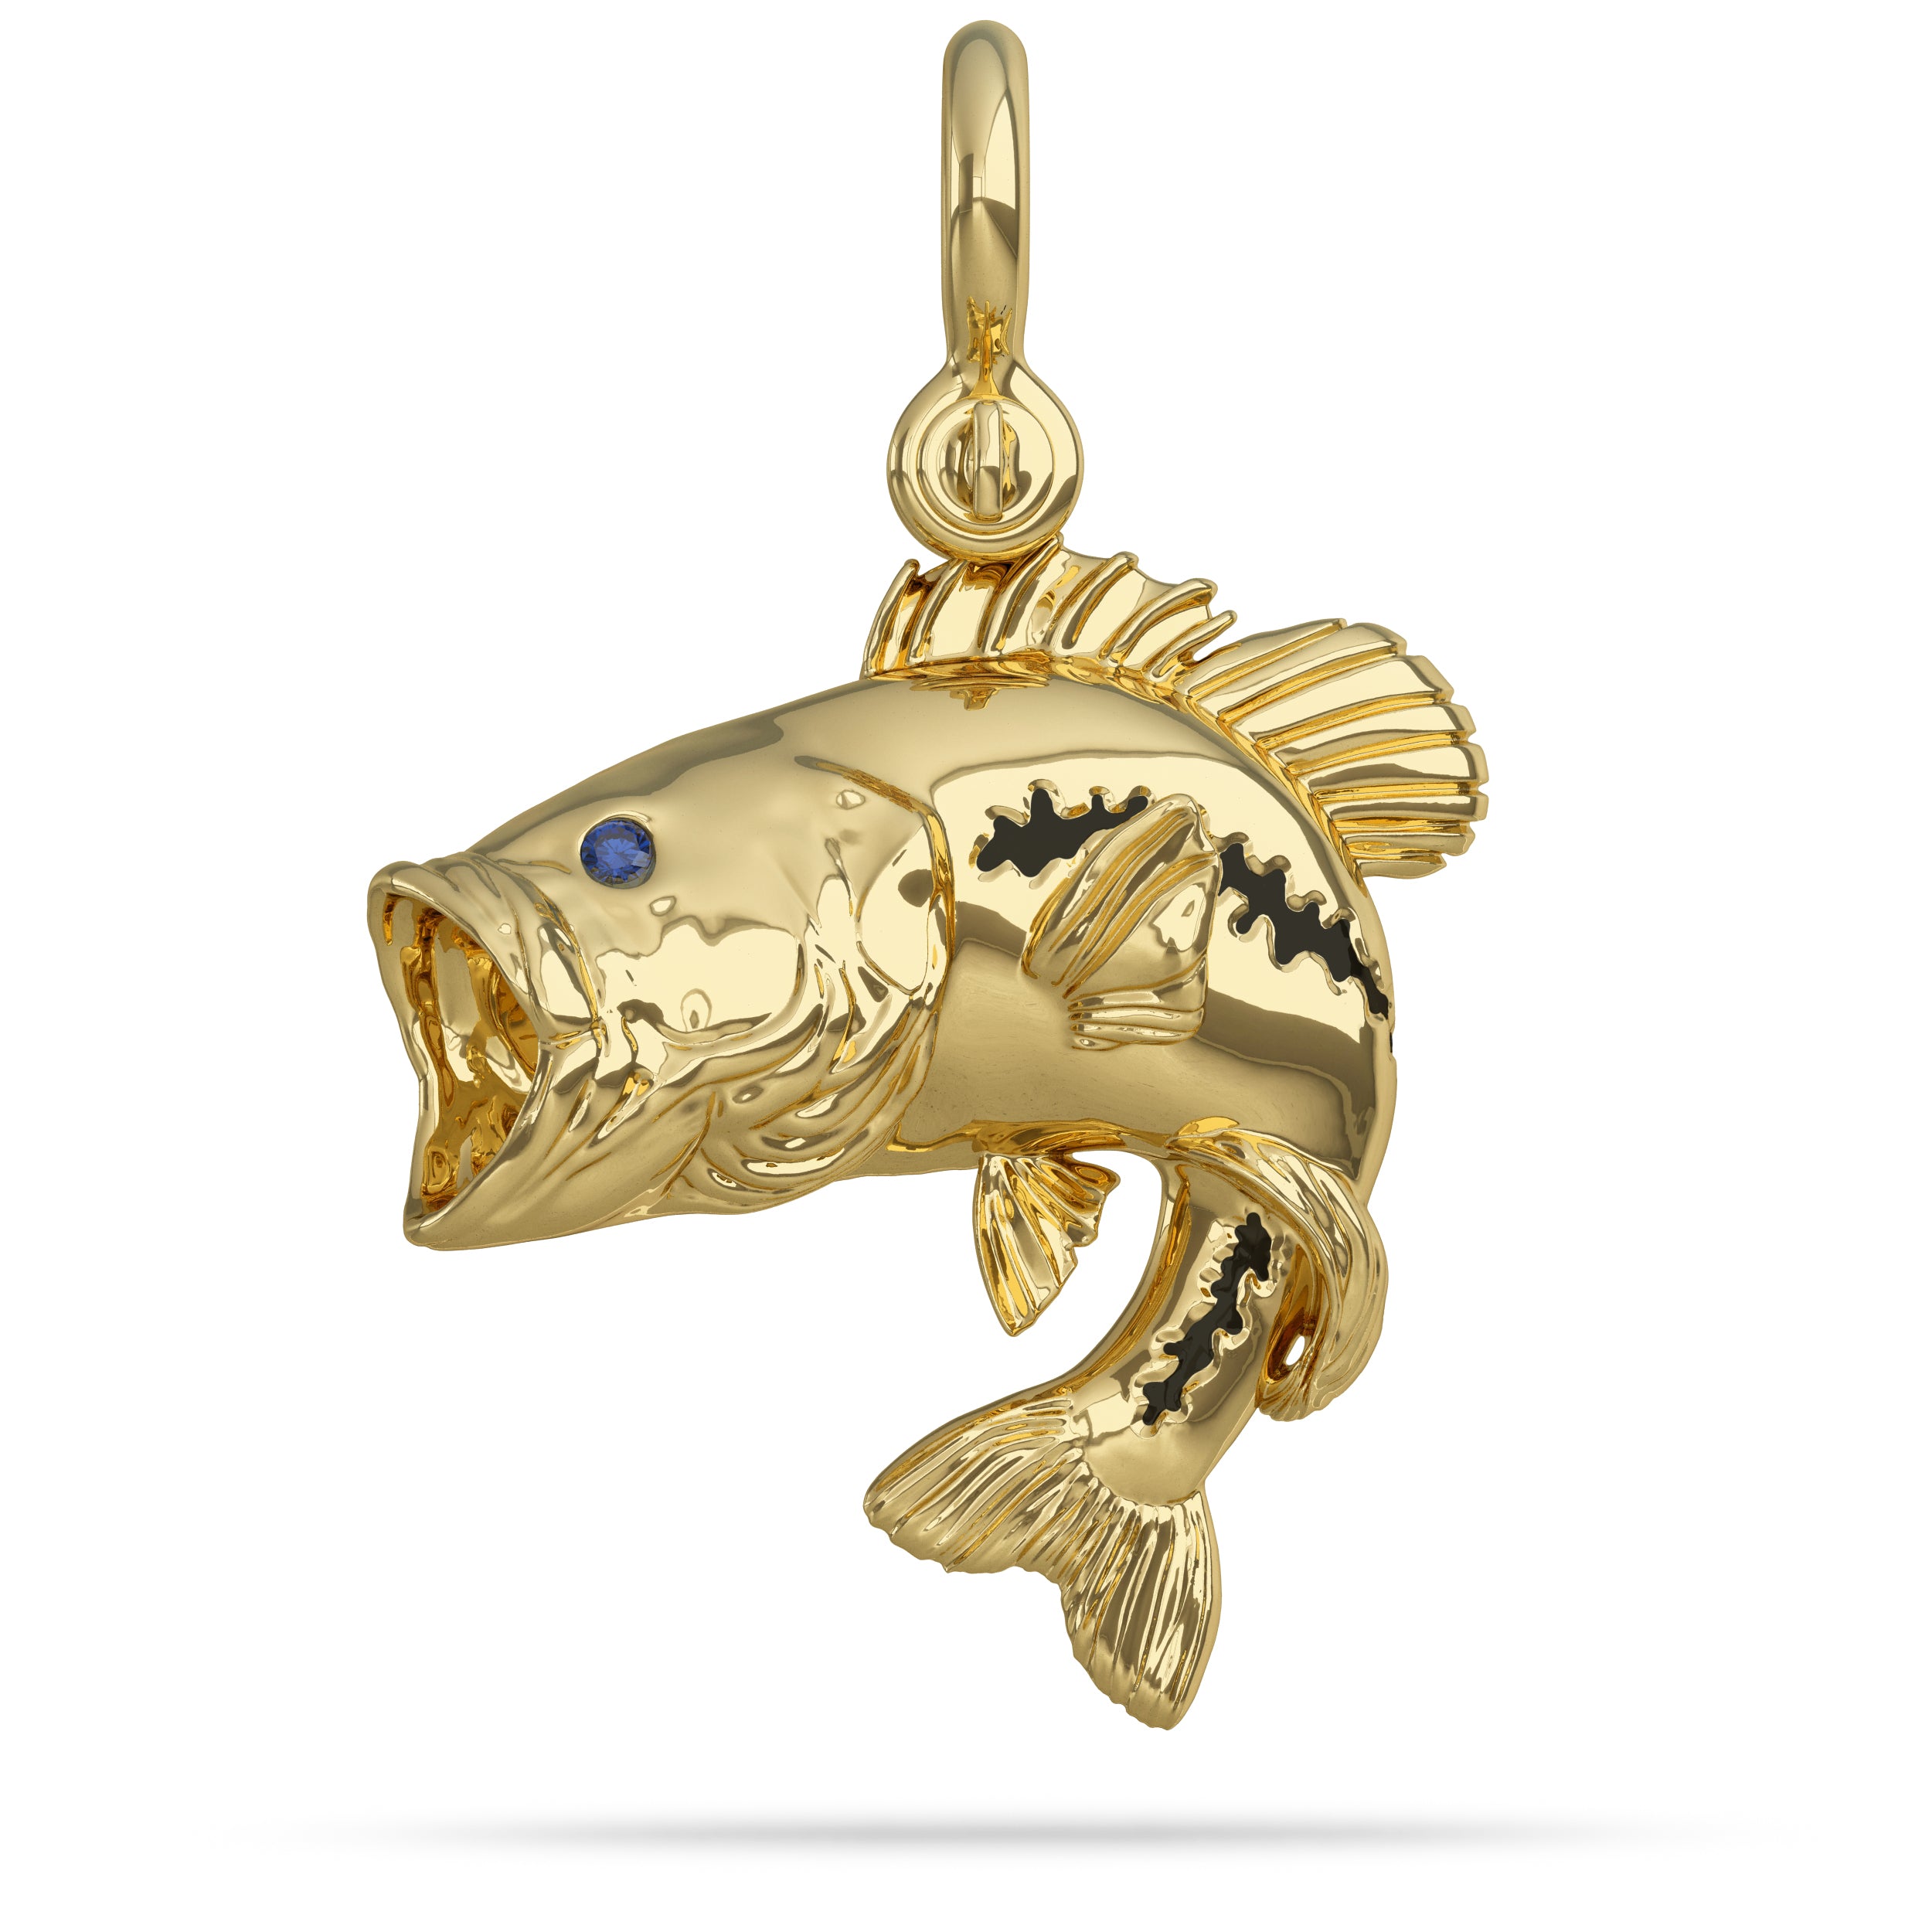 Solid 14k Gold Largemouth Bass Jumping Pendant with Mouth Open has High Polished Mirror Finish With Blue Sapphire Eyes With A Mariner Style Shackle Bail Custom Designed for Bass Fisherman By Nautical Treasure Jewelry In The Florida Keys